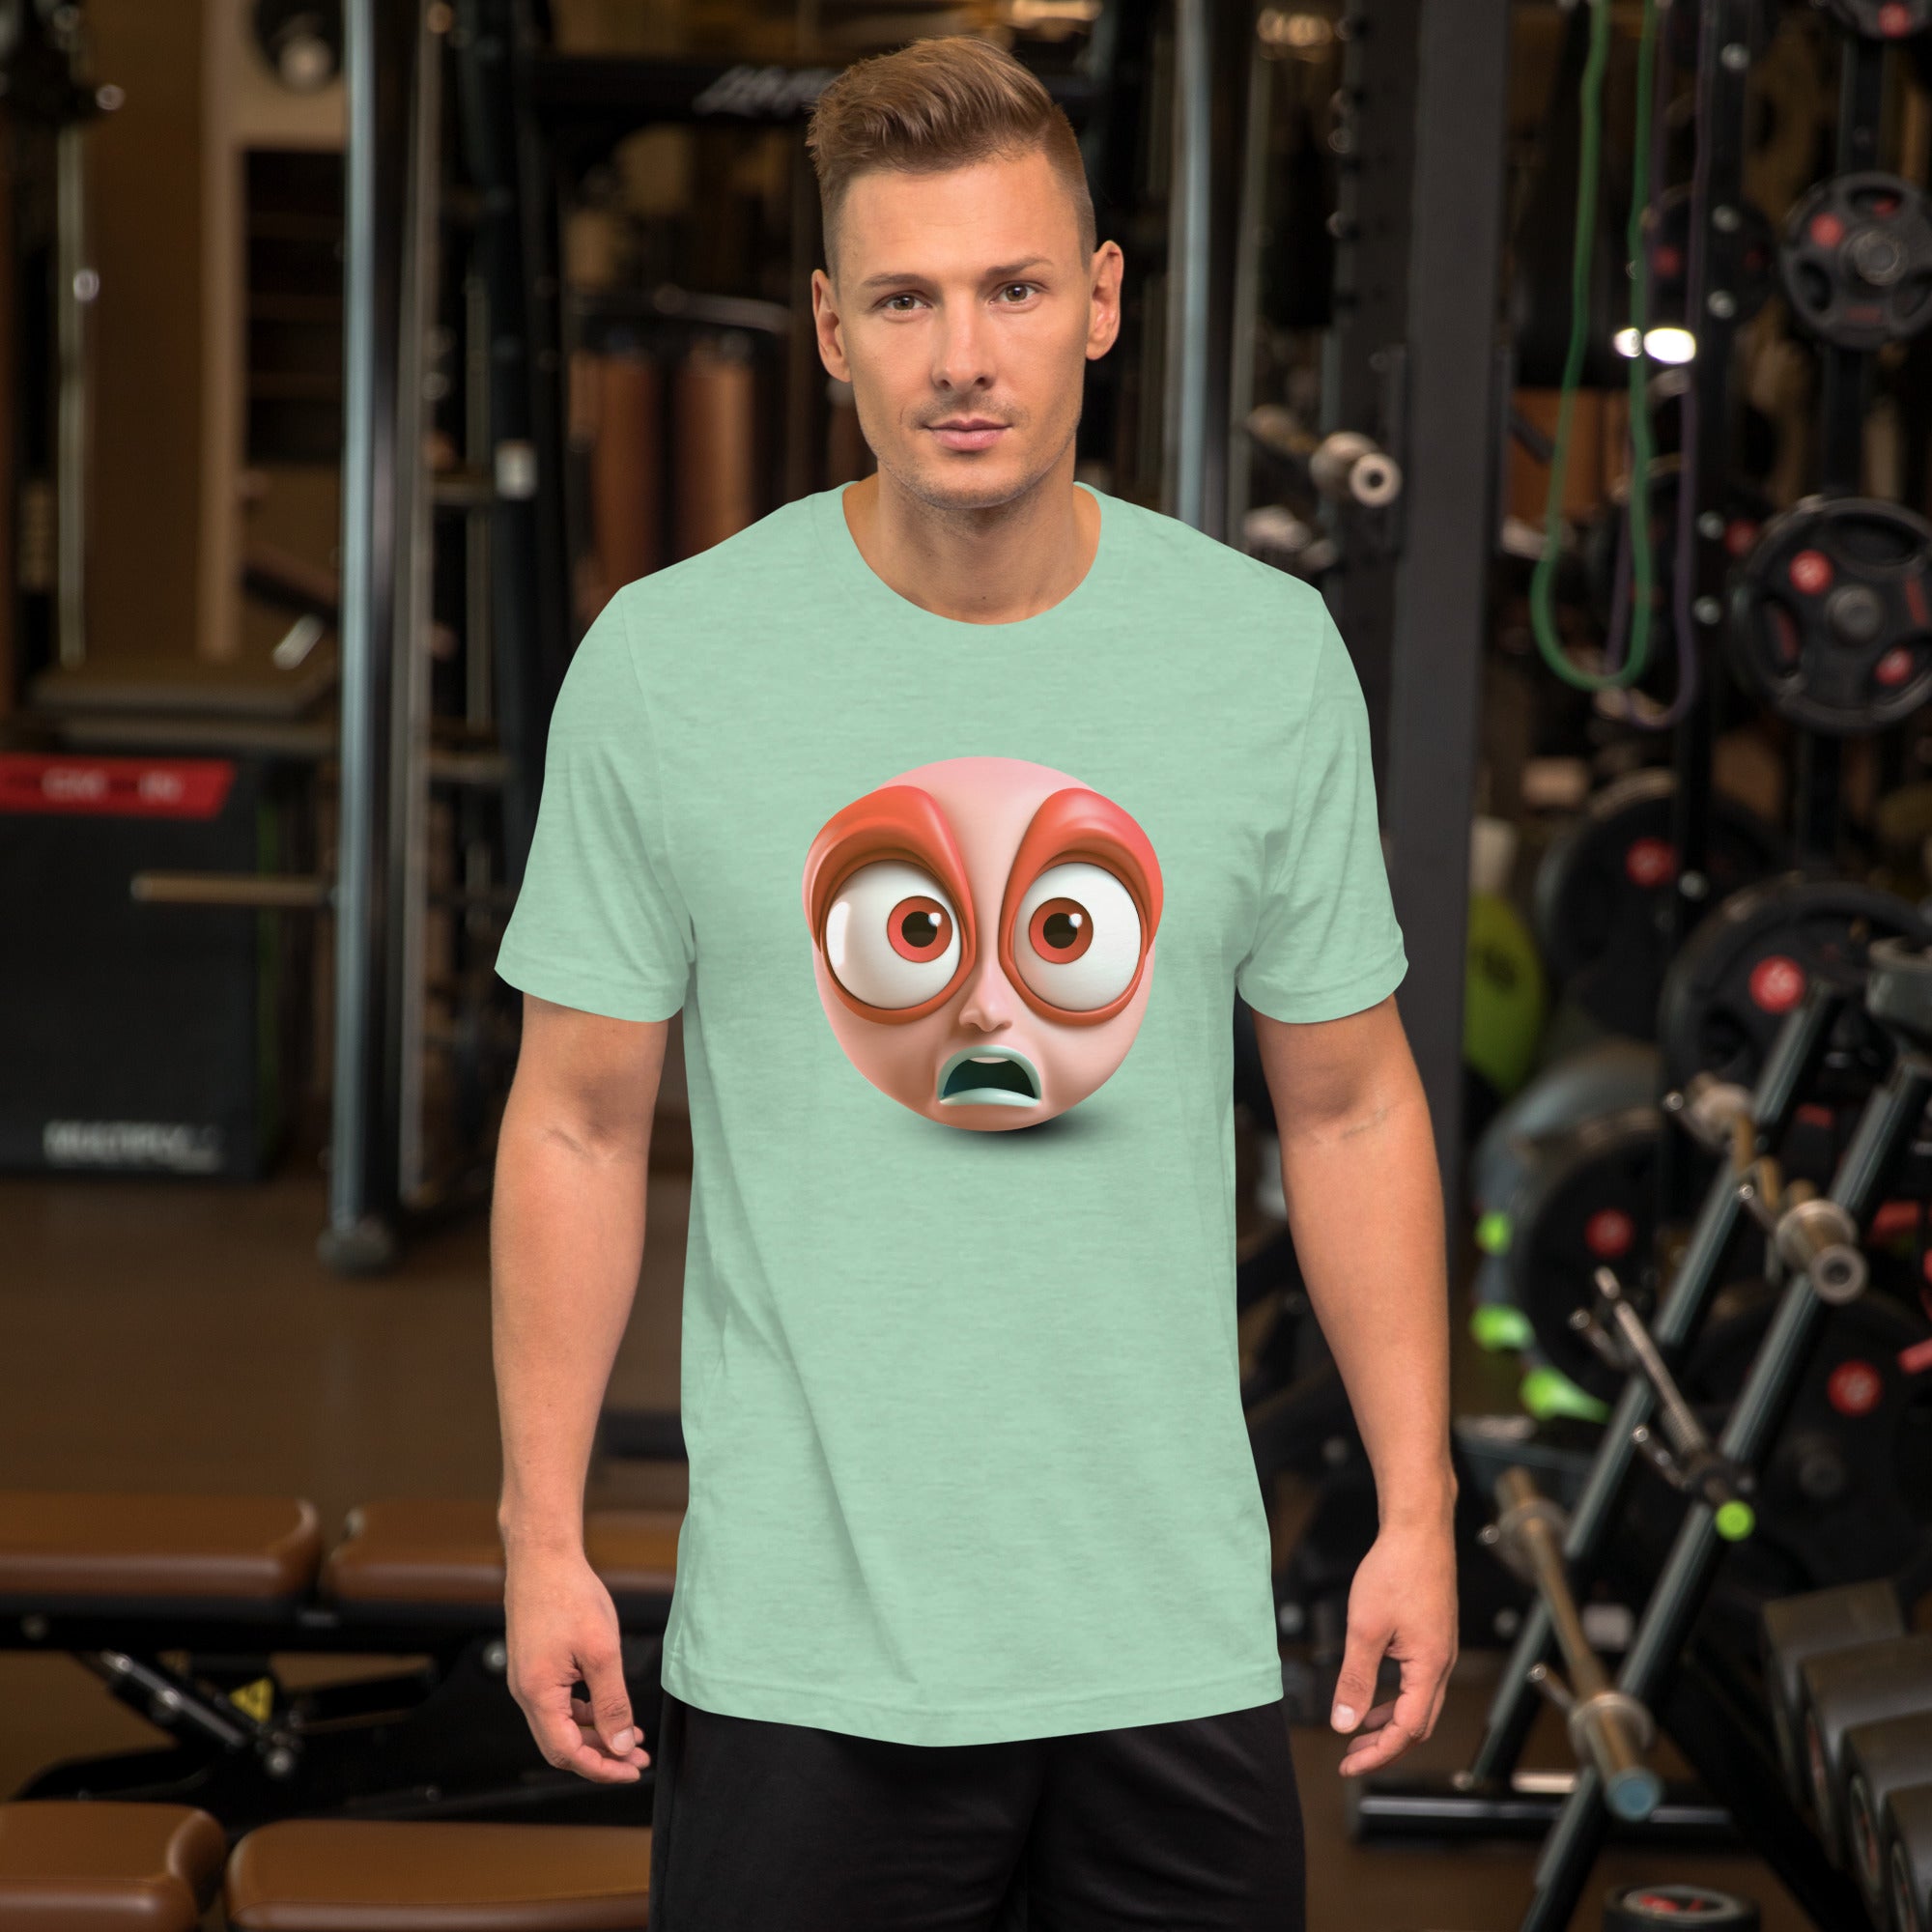 Casual Unisex T-Shirt with Smiley Face Design